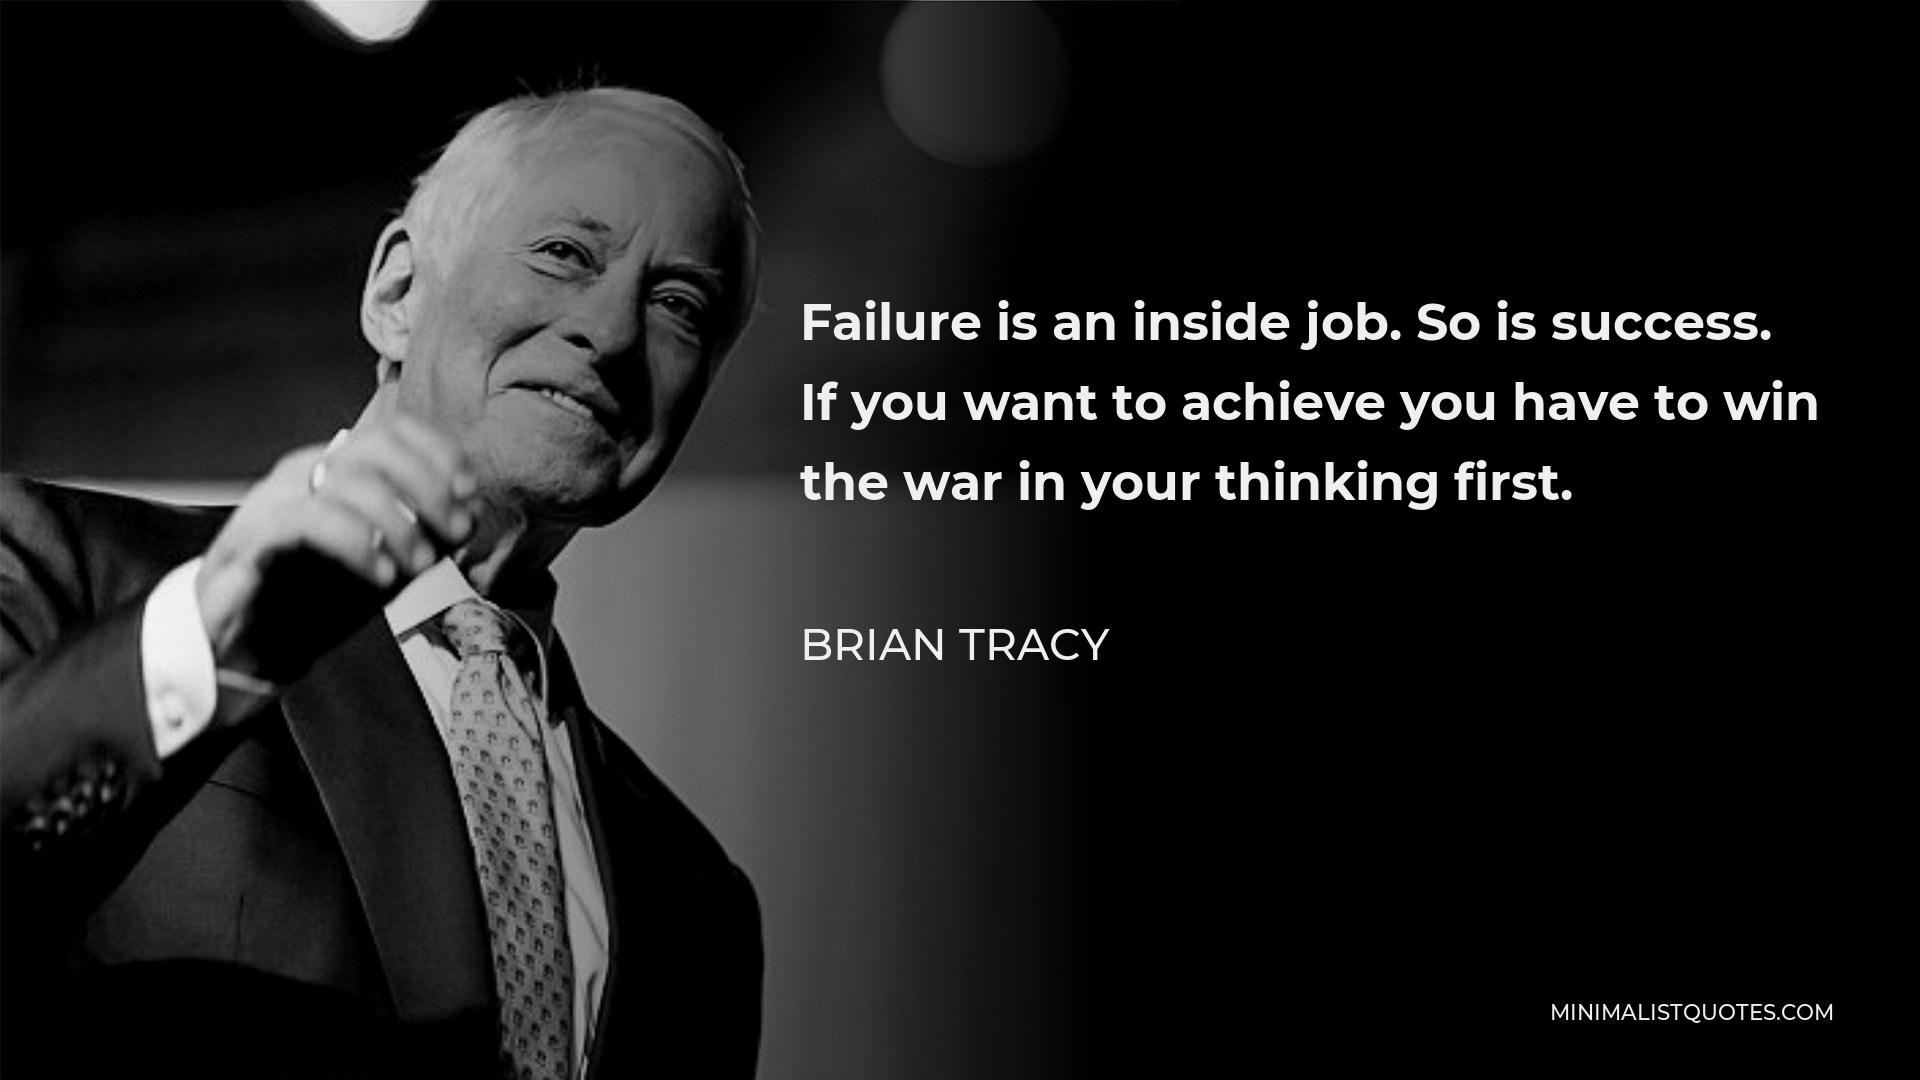 Brian Tracy Quote - Failure is an inside job. So is success. If you want to achieve you have to win the war in your thinking first.